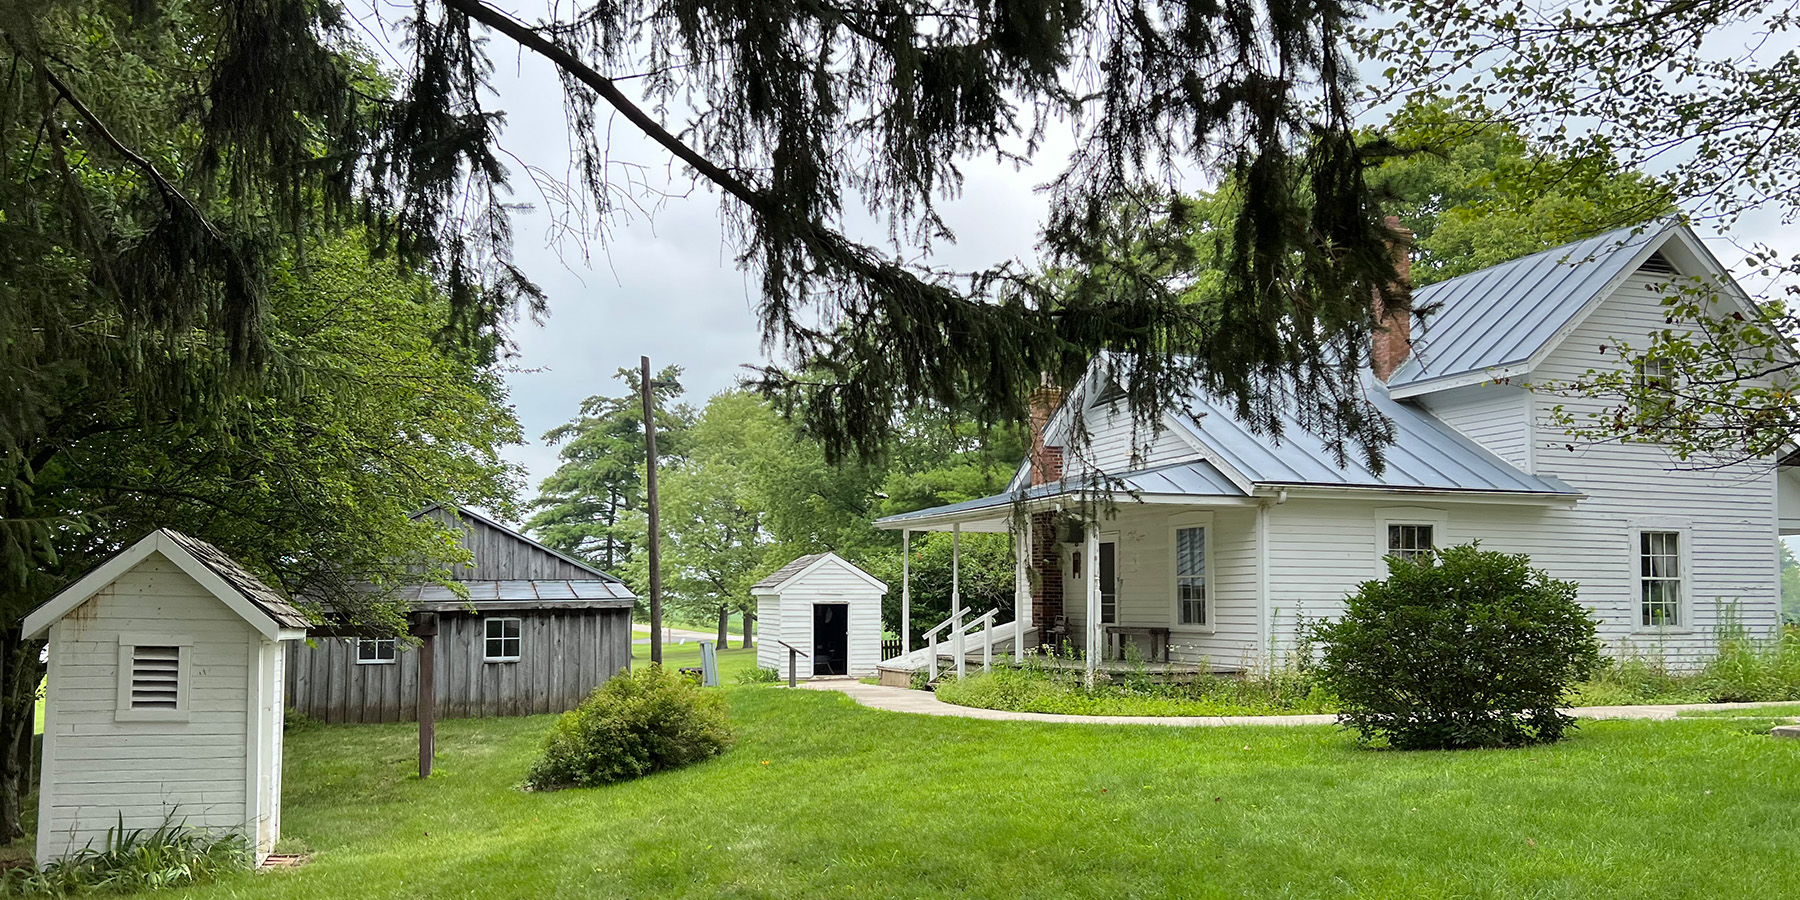 The birth home of Wilbur Wright.